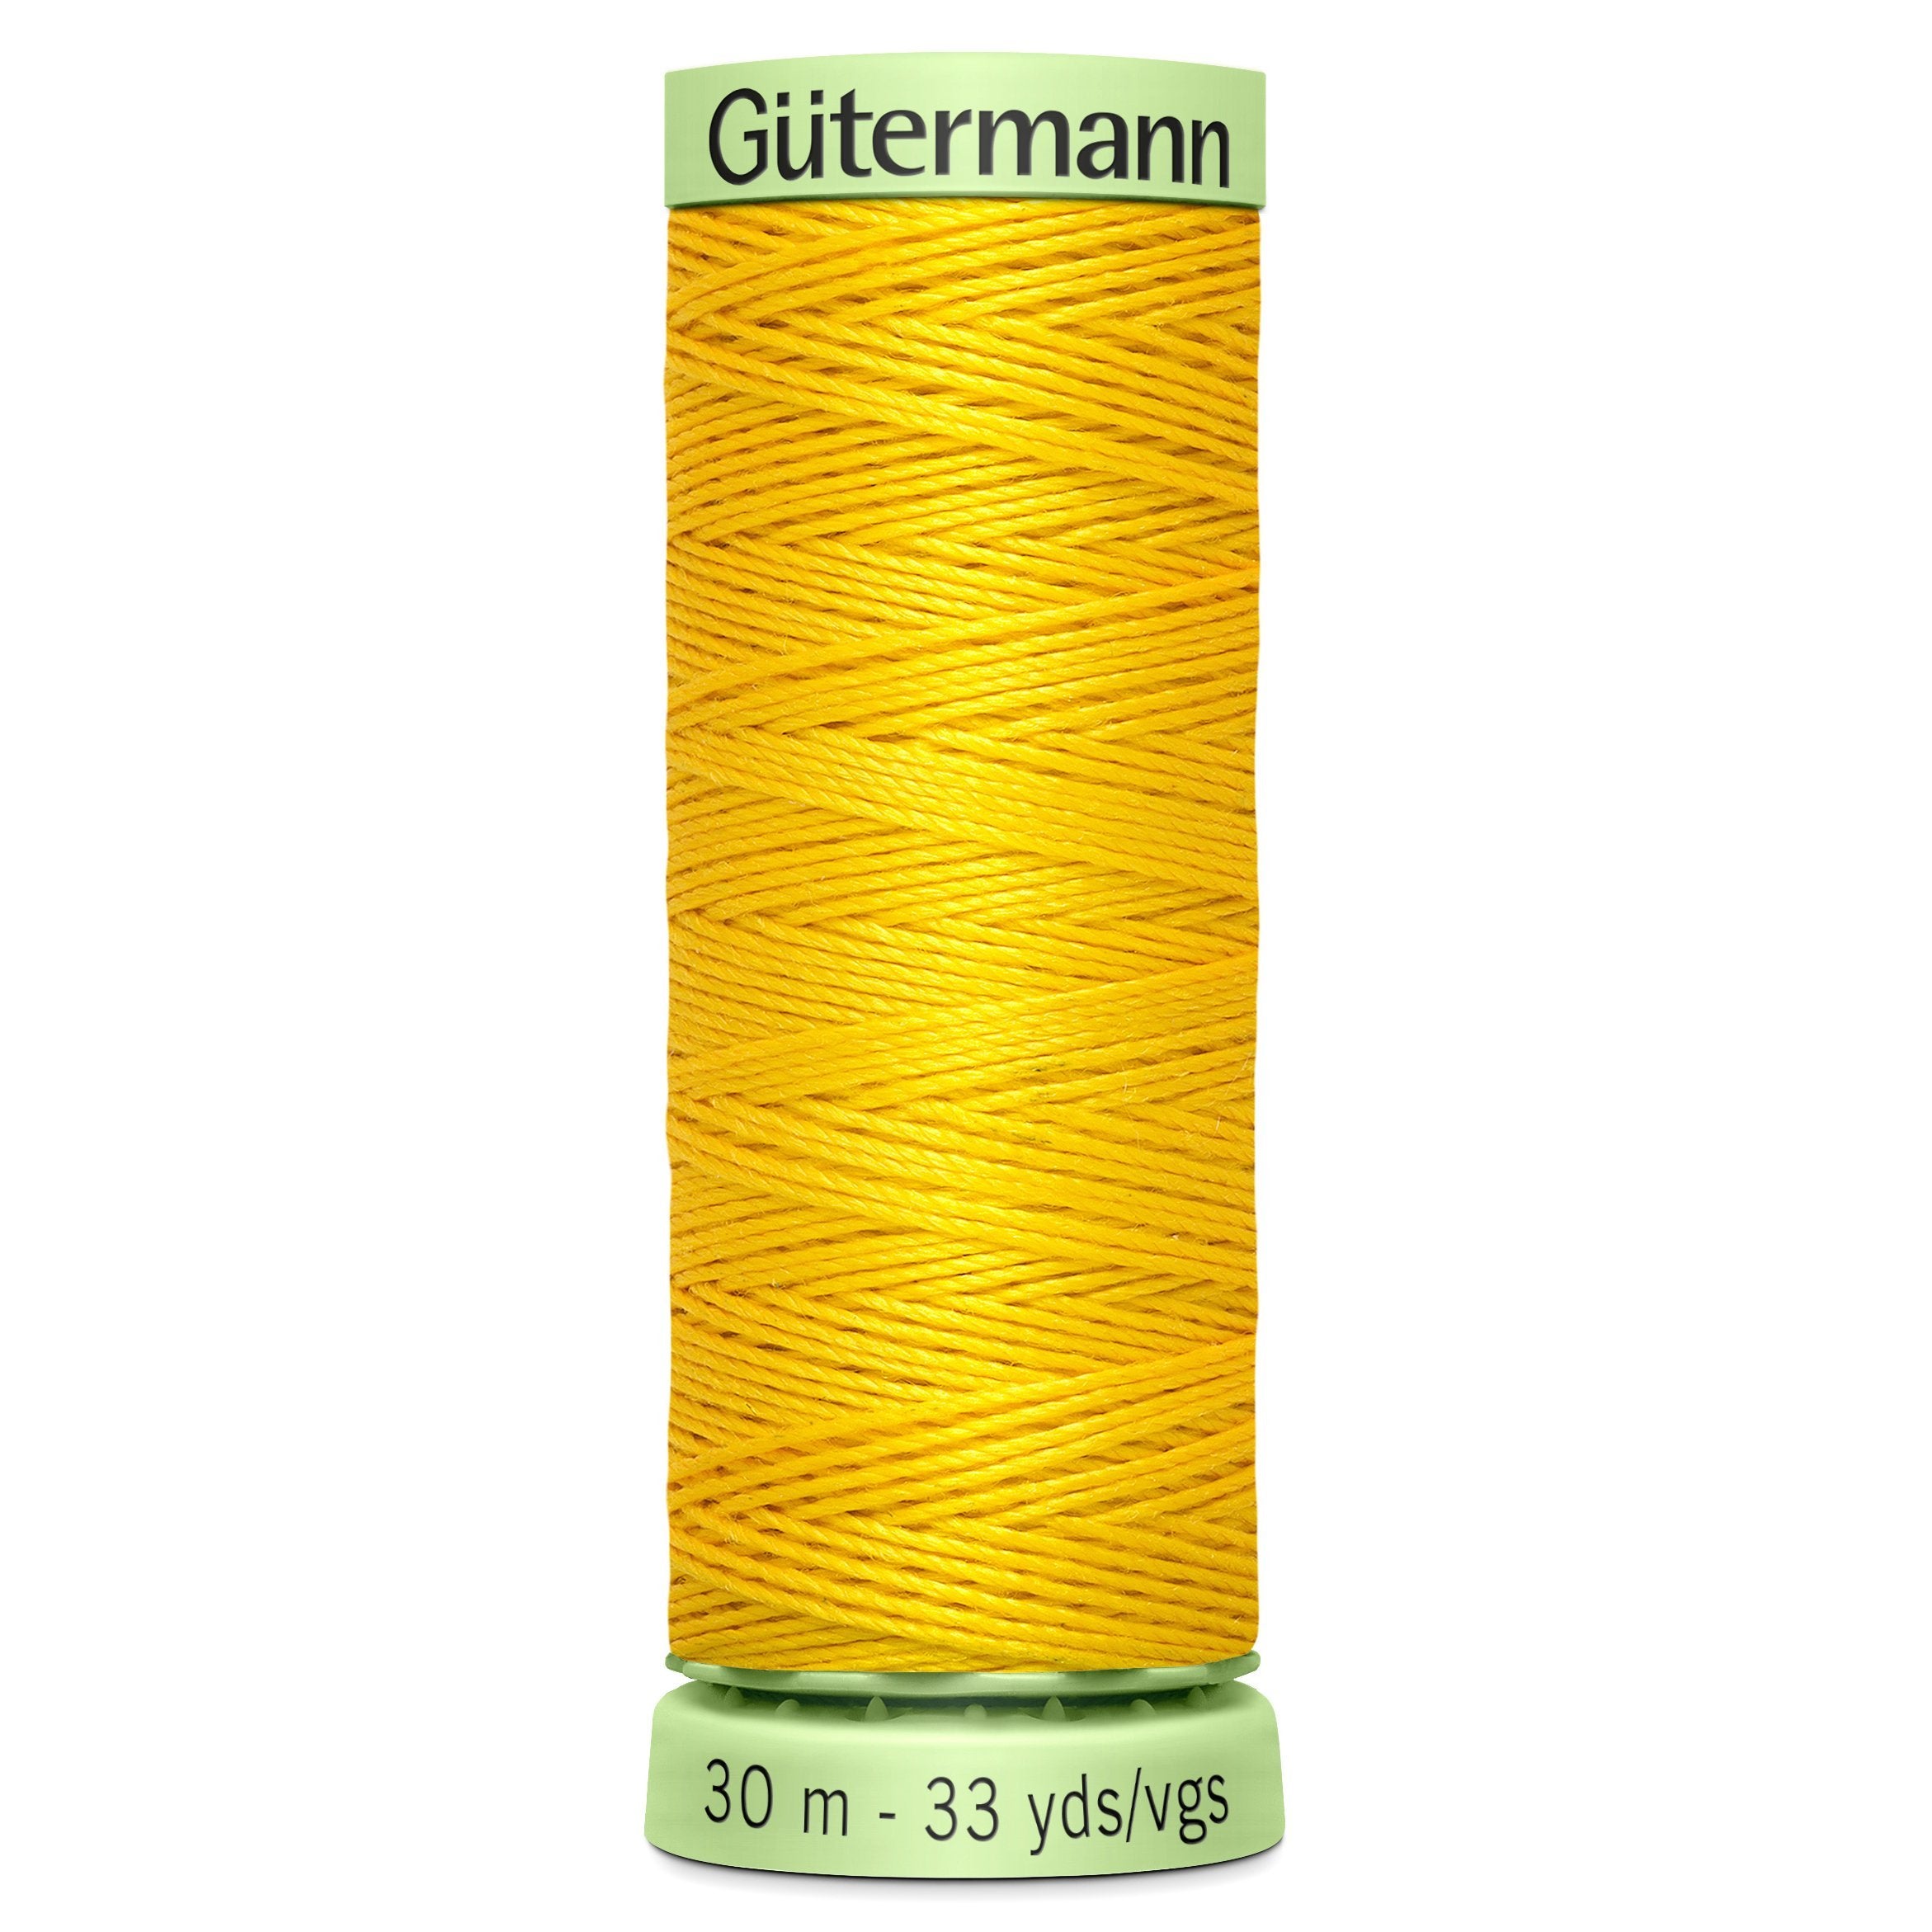 Gutermann TopStitch Thread 106 | Yellow from Jaycotts Sewing Supplies